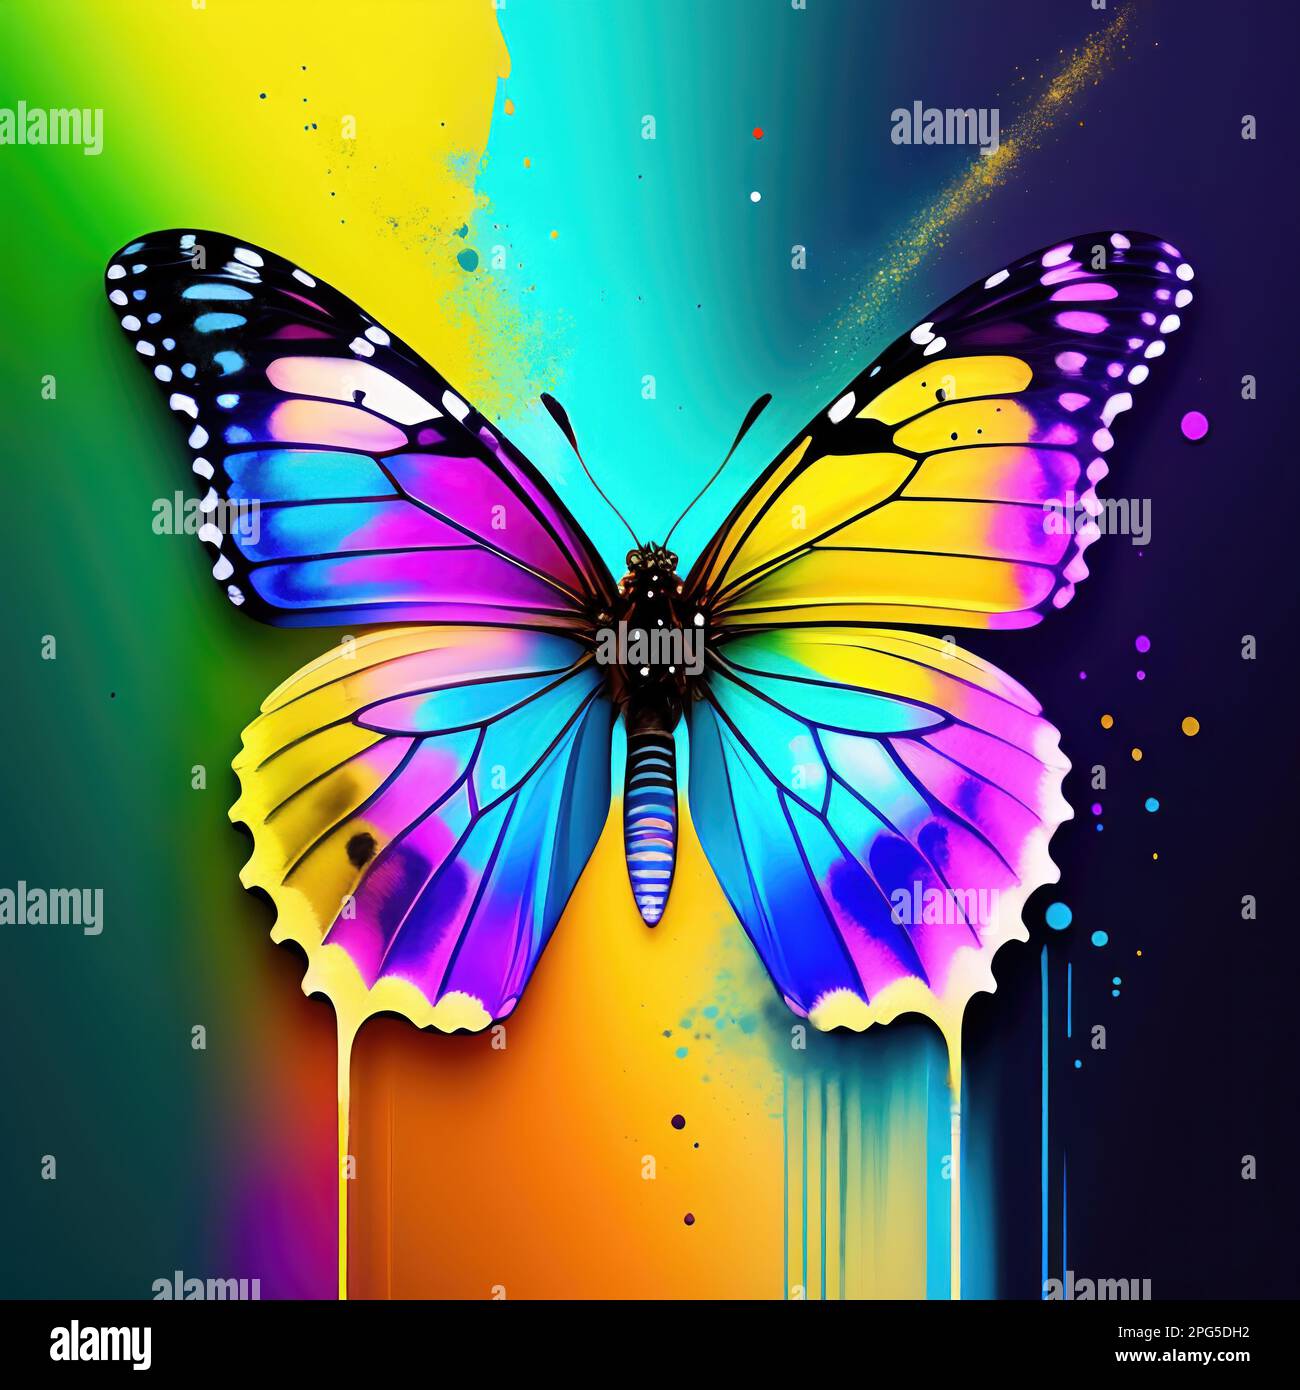 Illustration of beautiful butterfly in abstract splash style Stock Photo